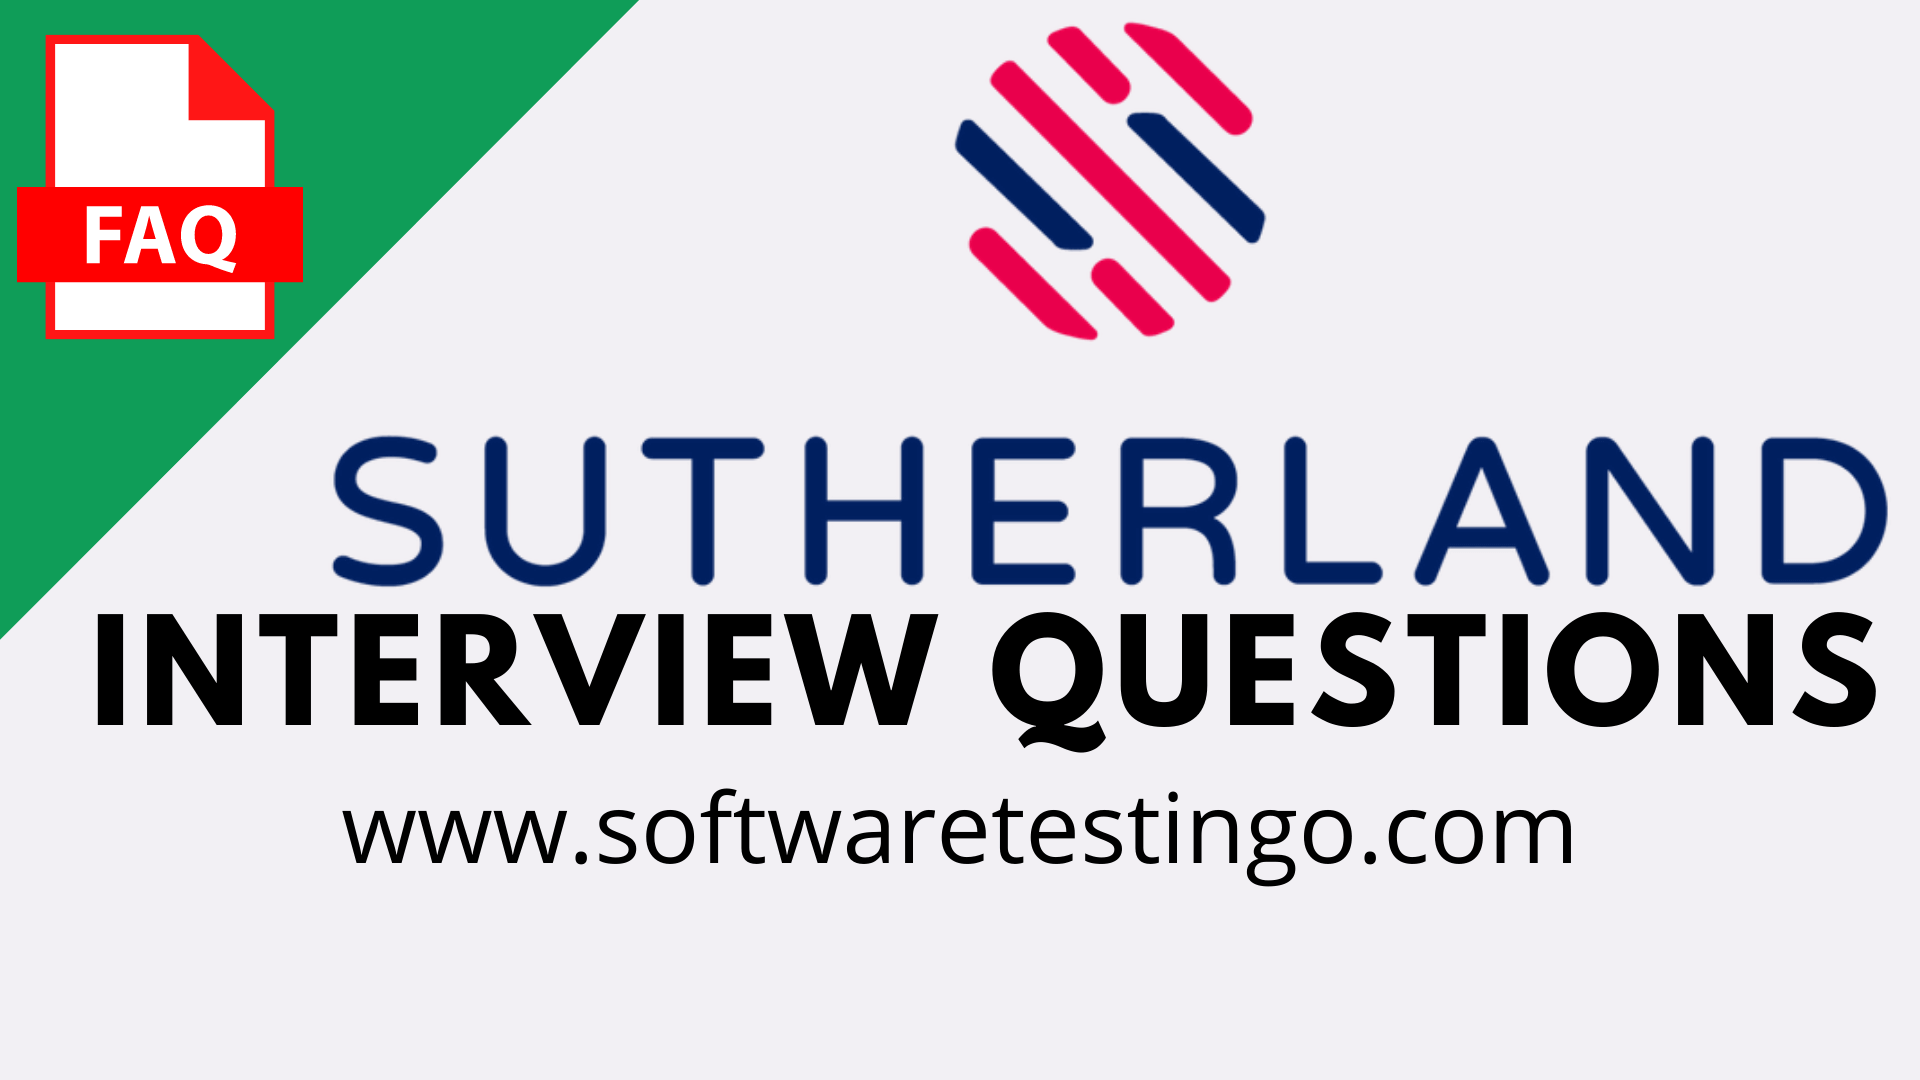 Sutherland Interview Questions